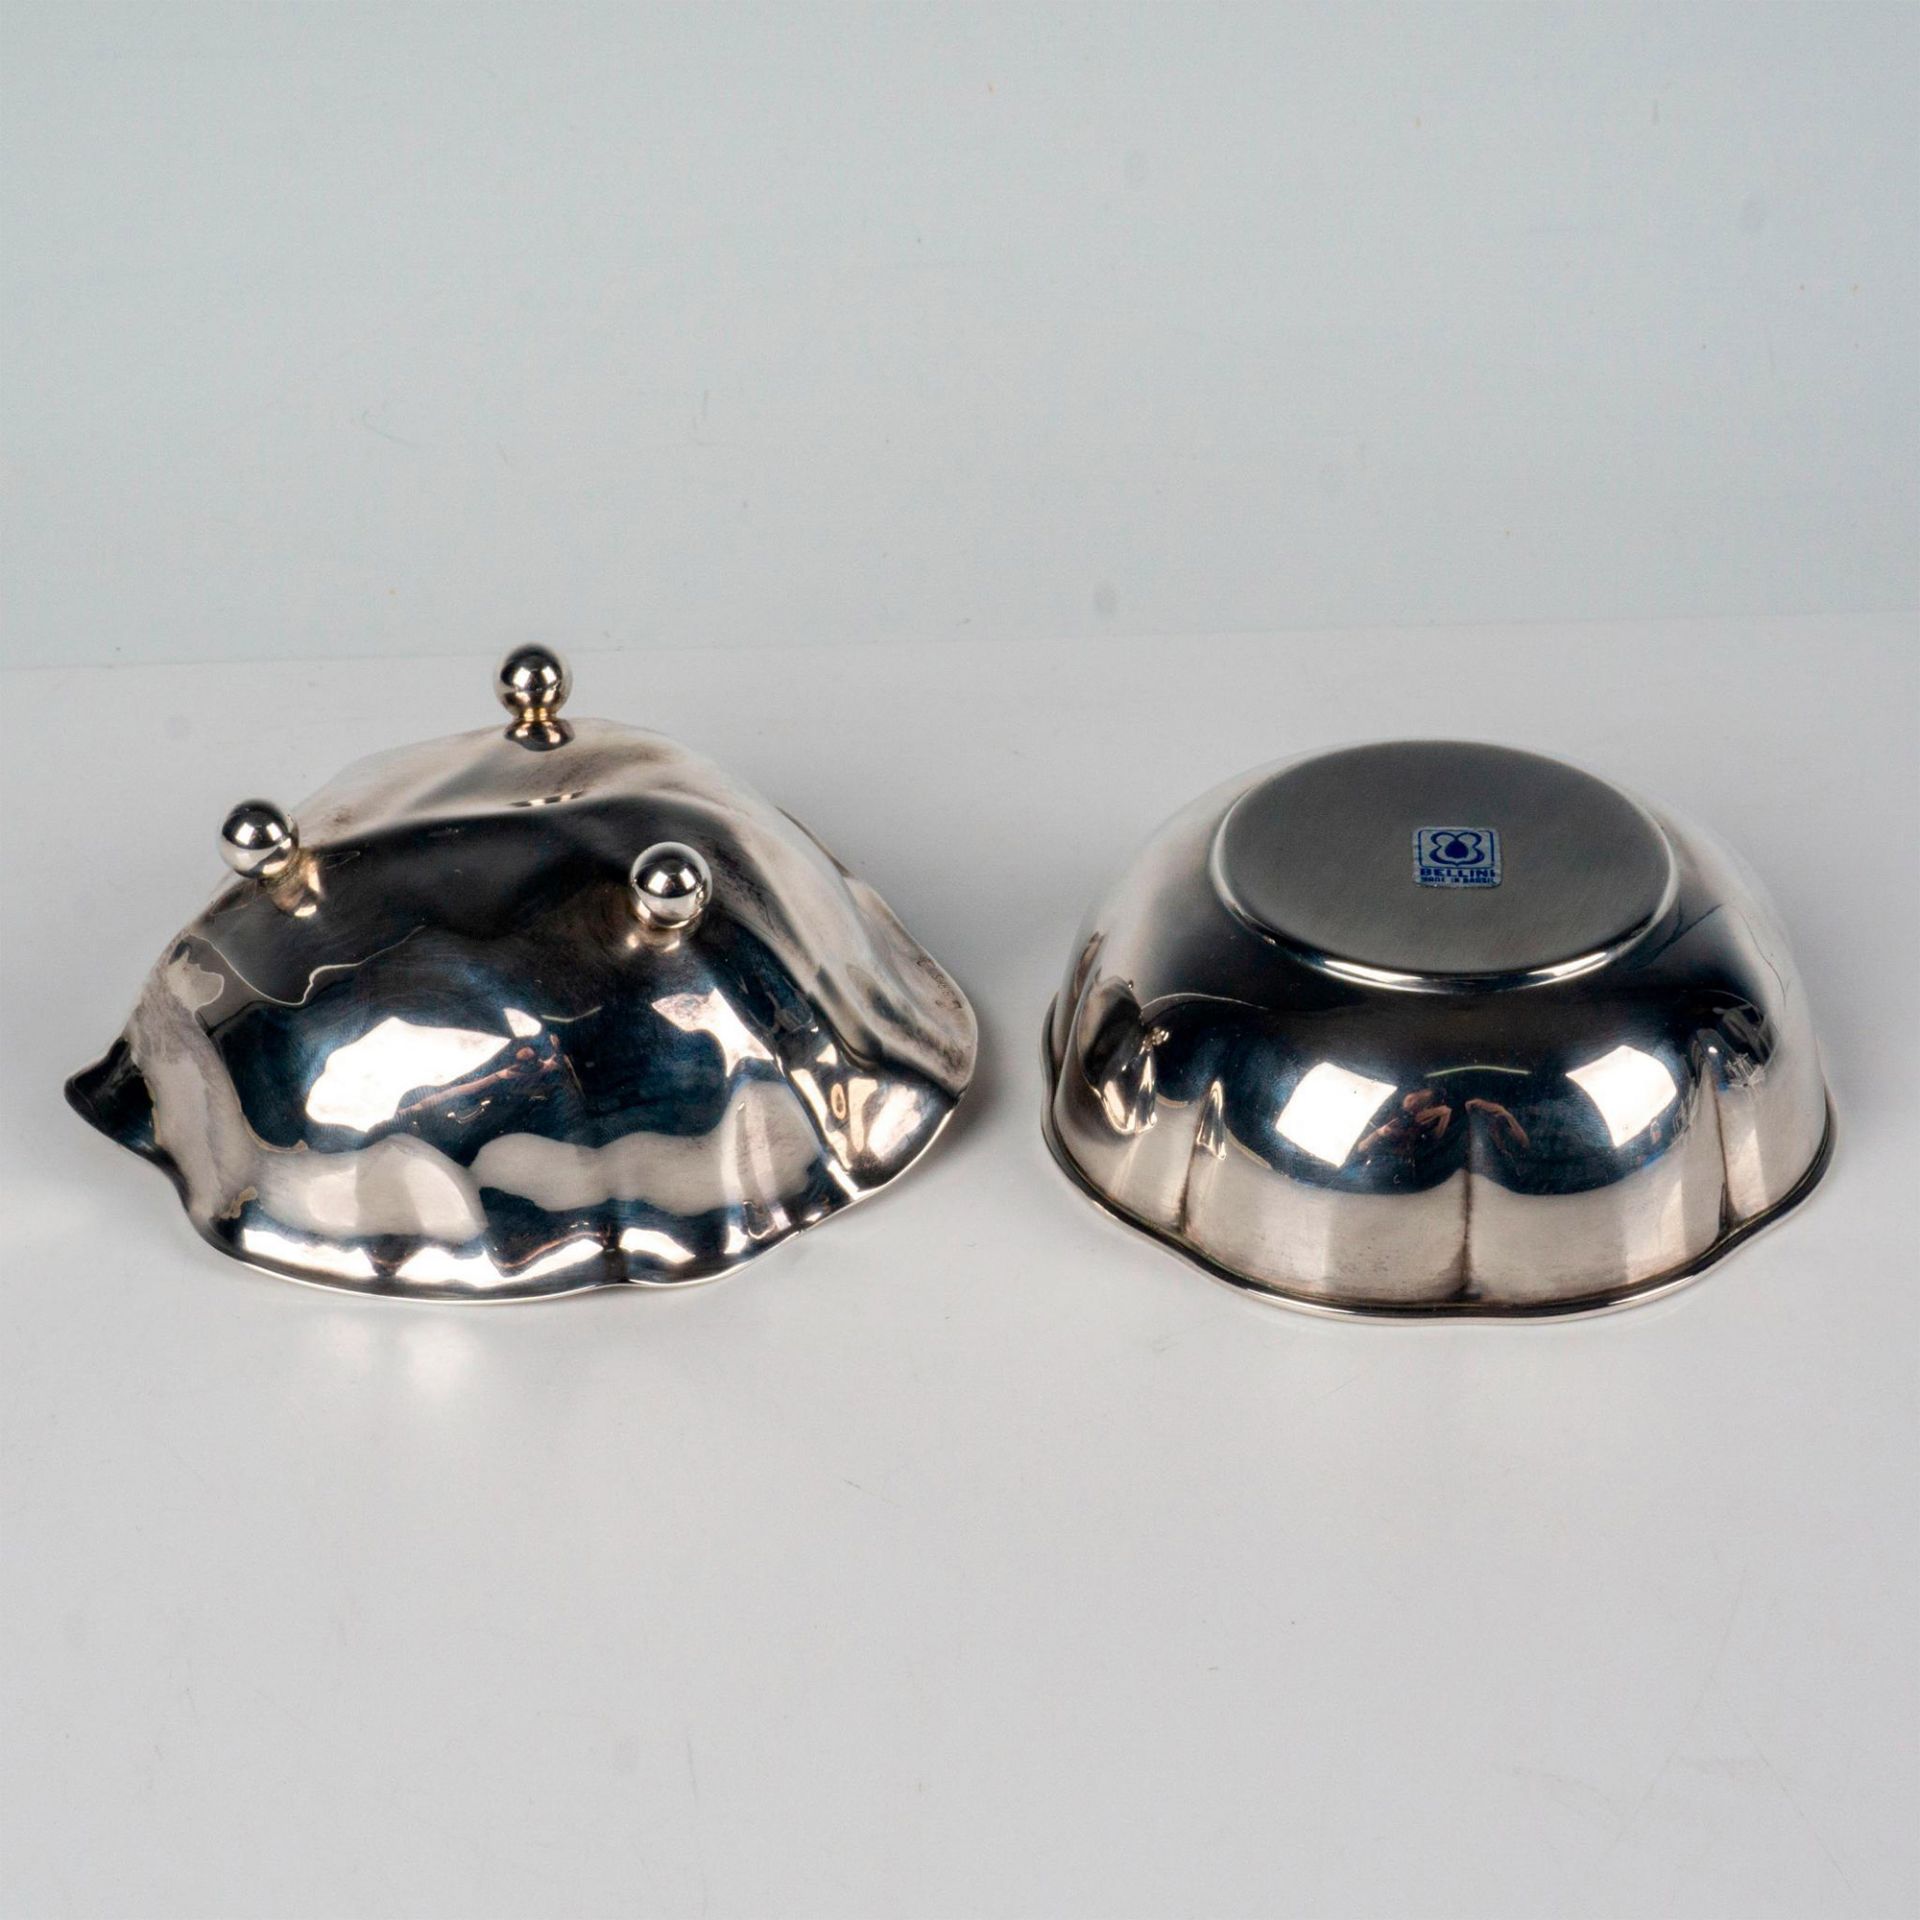 2pc Bellini Silver Plated Bowls - Image 2 of 2